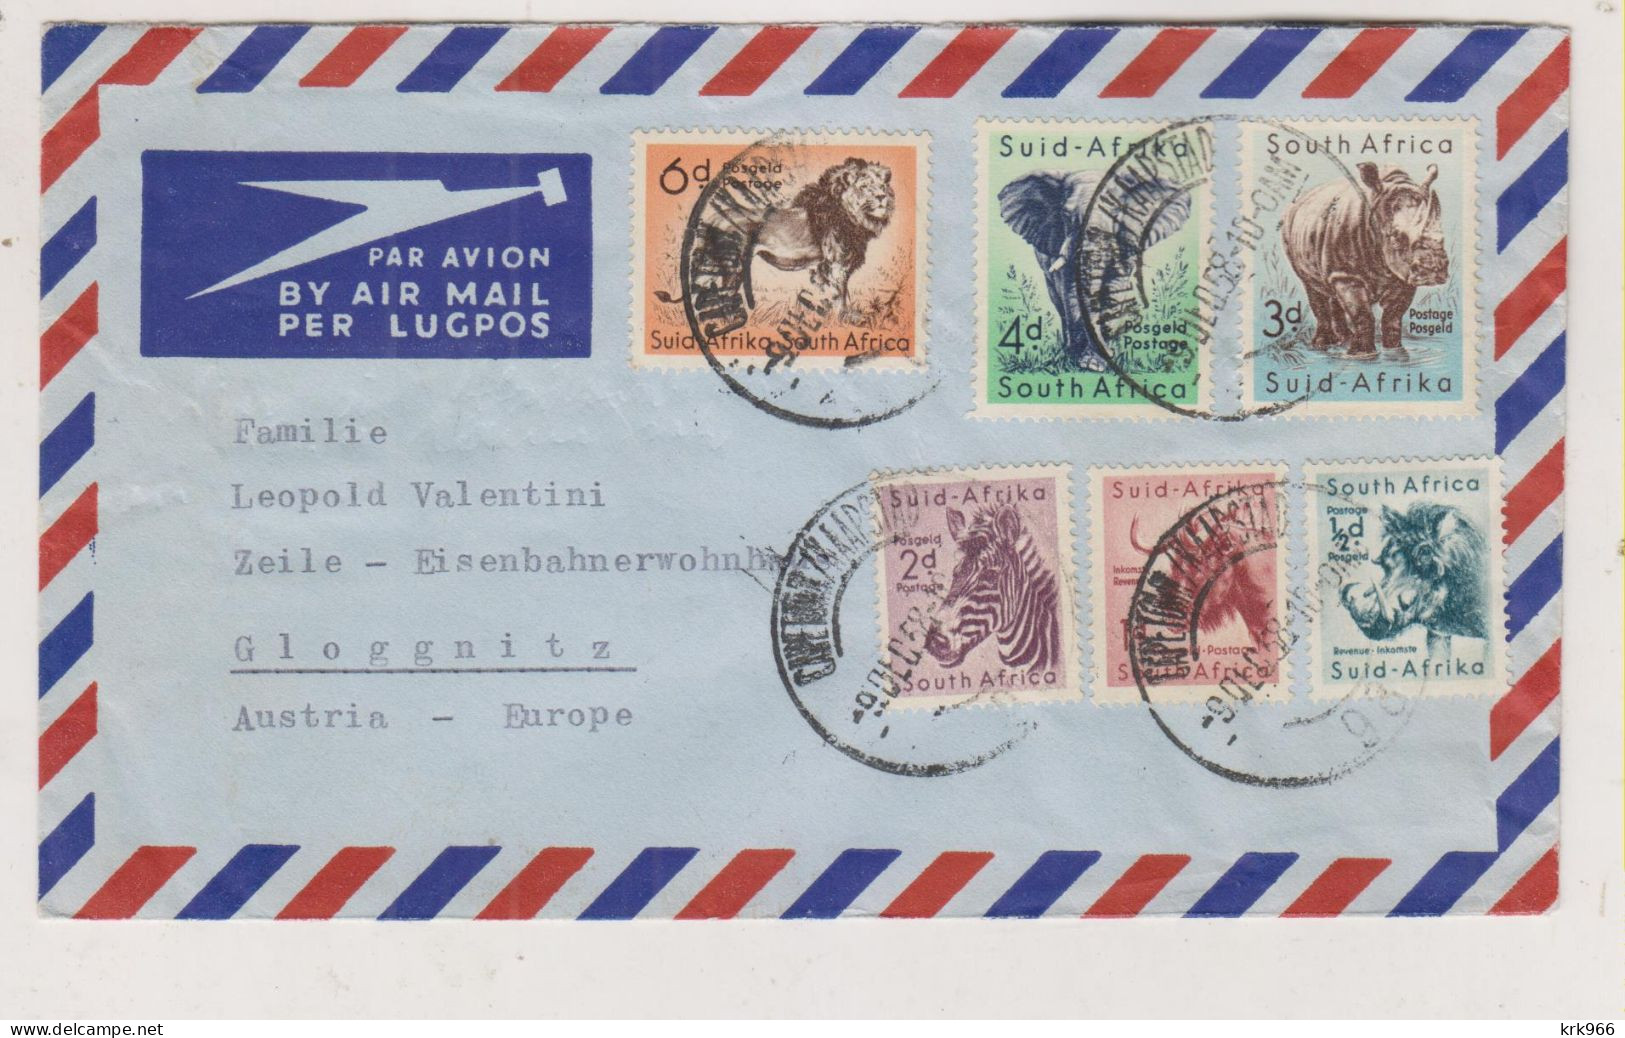 SOUTH AFRICA 1958 CAPE TOWN  Nice   Airmail Cover To Austria - Airmail